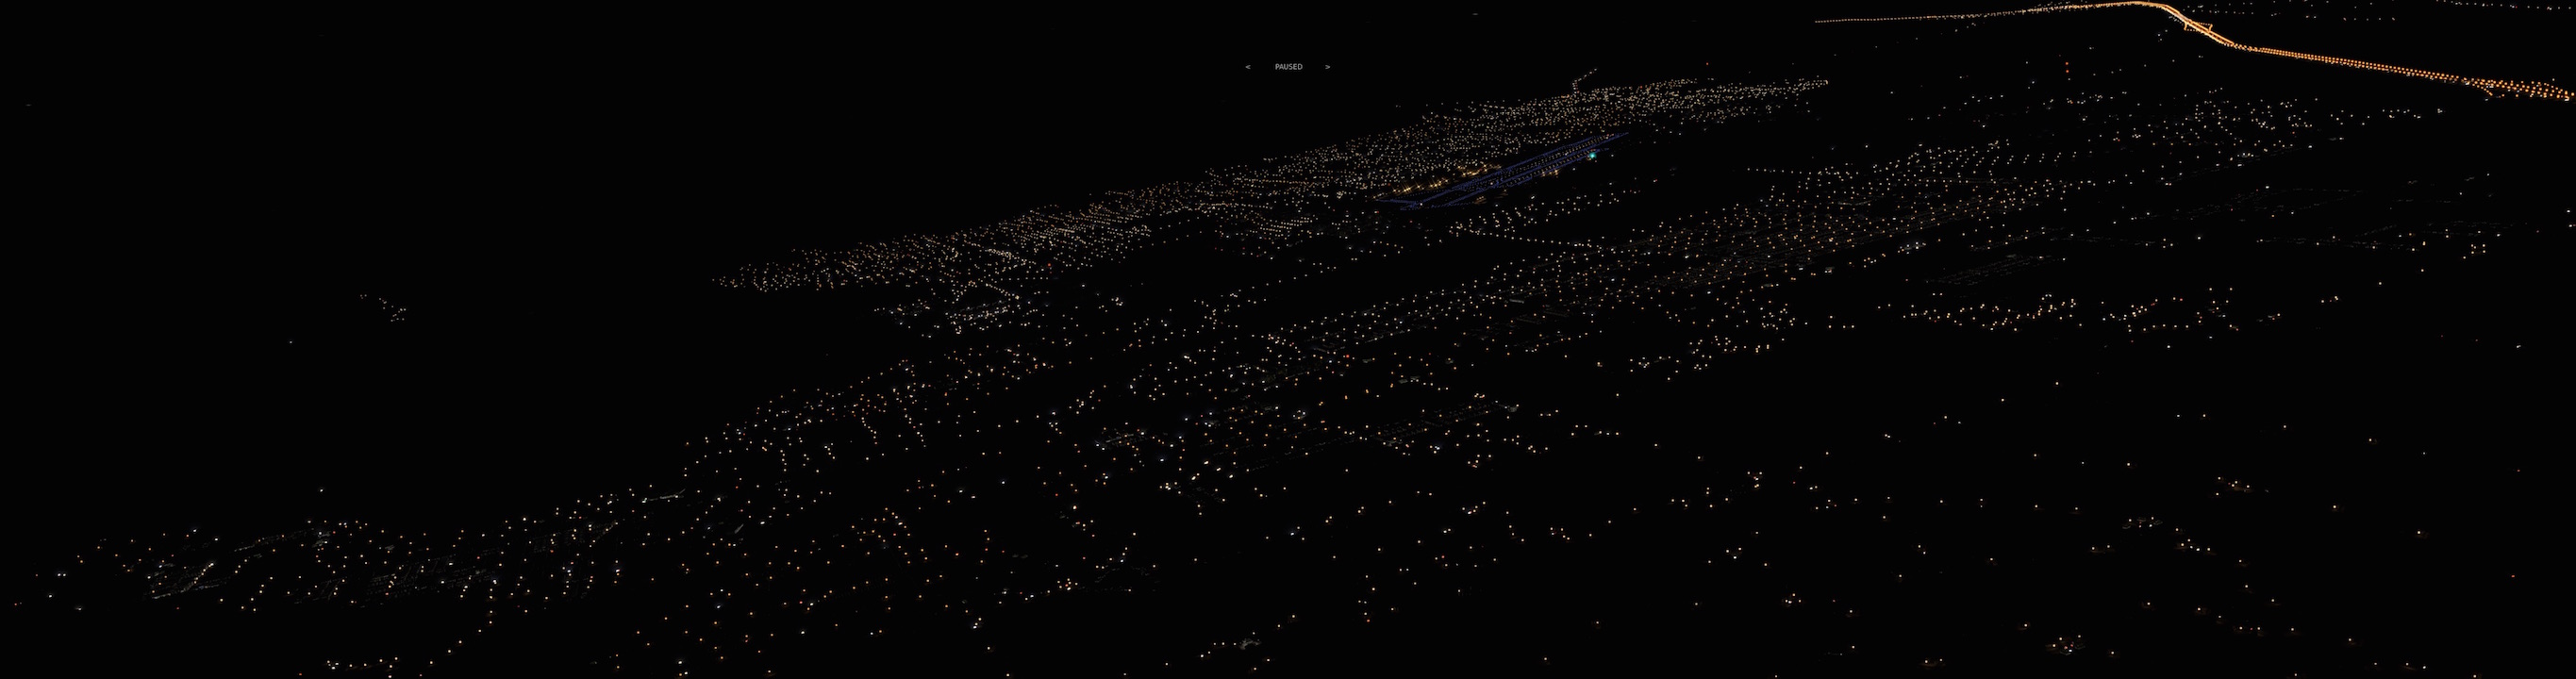 Objects and roads maxed out at night.